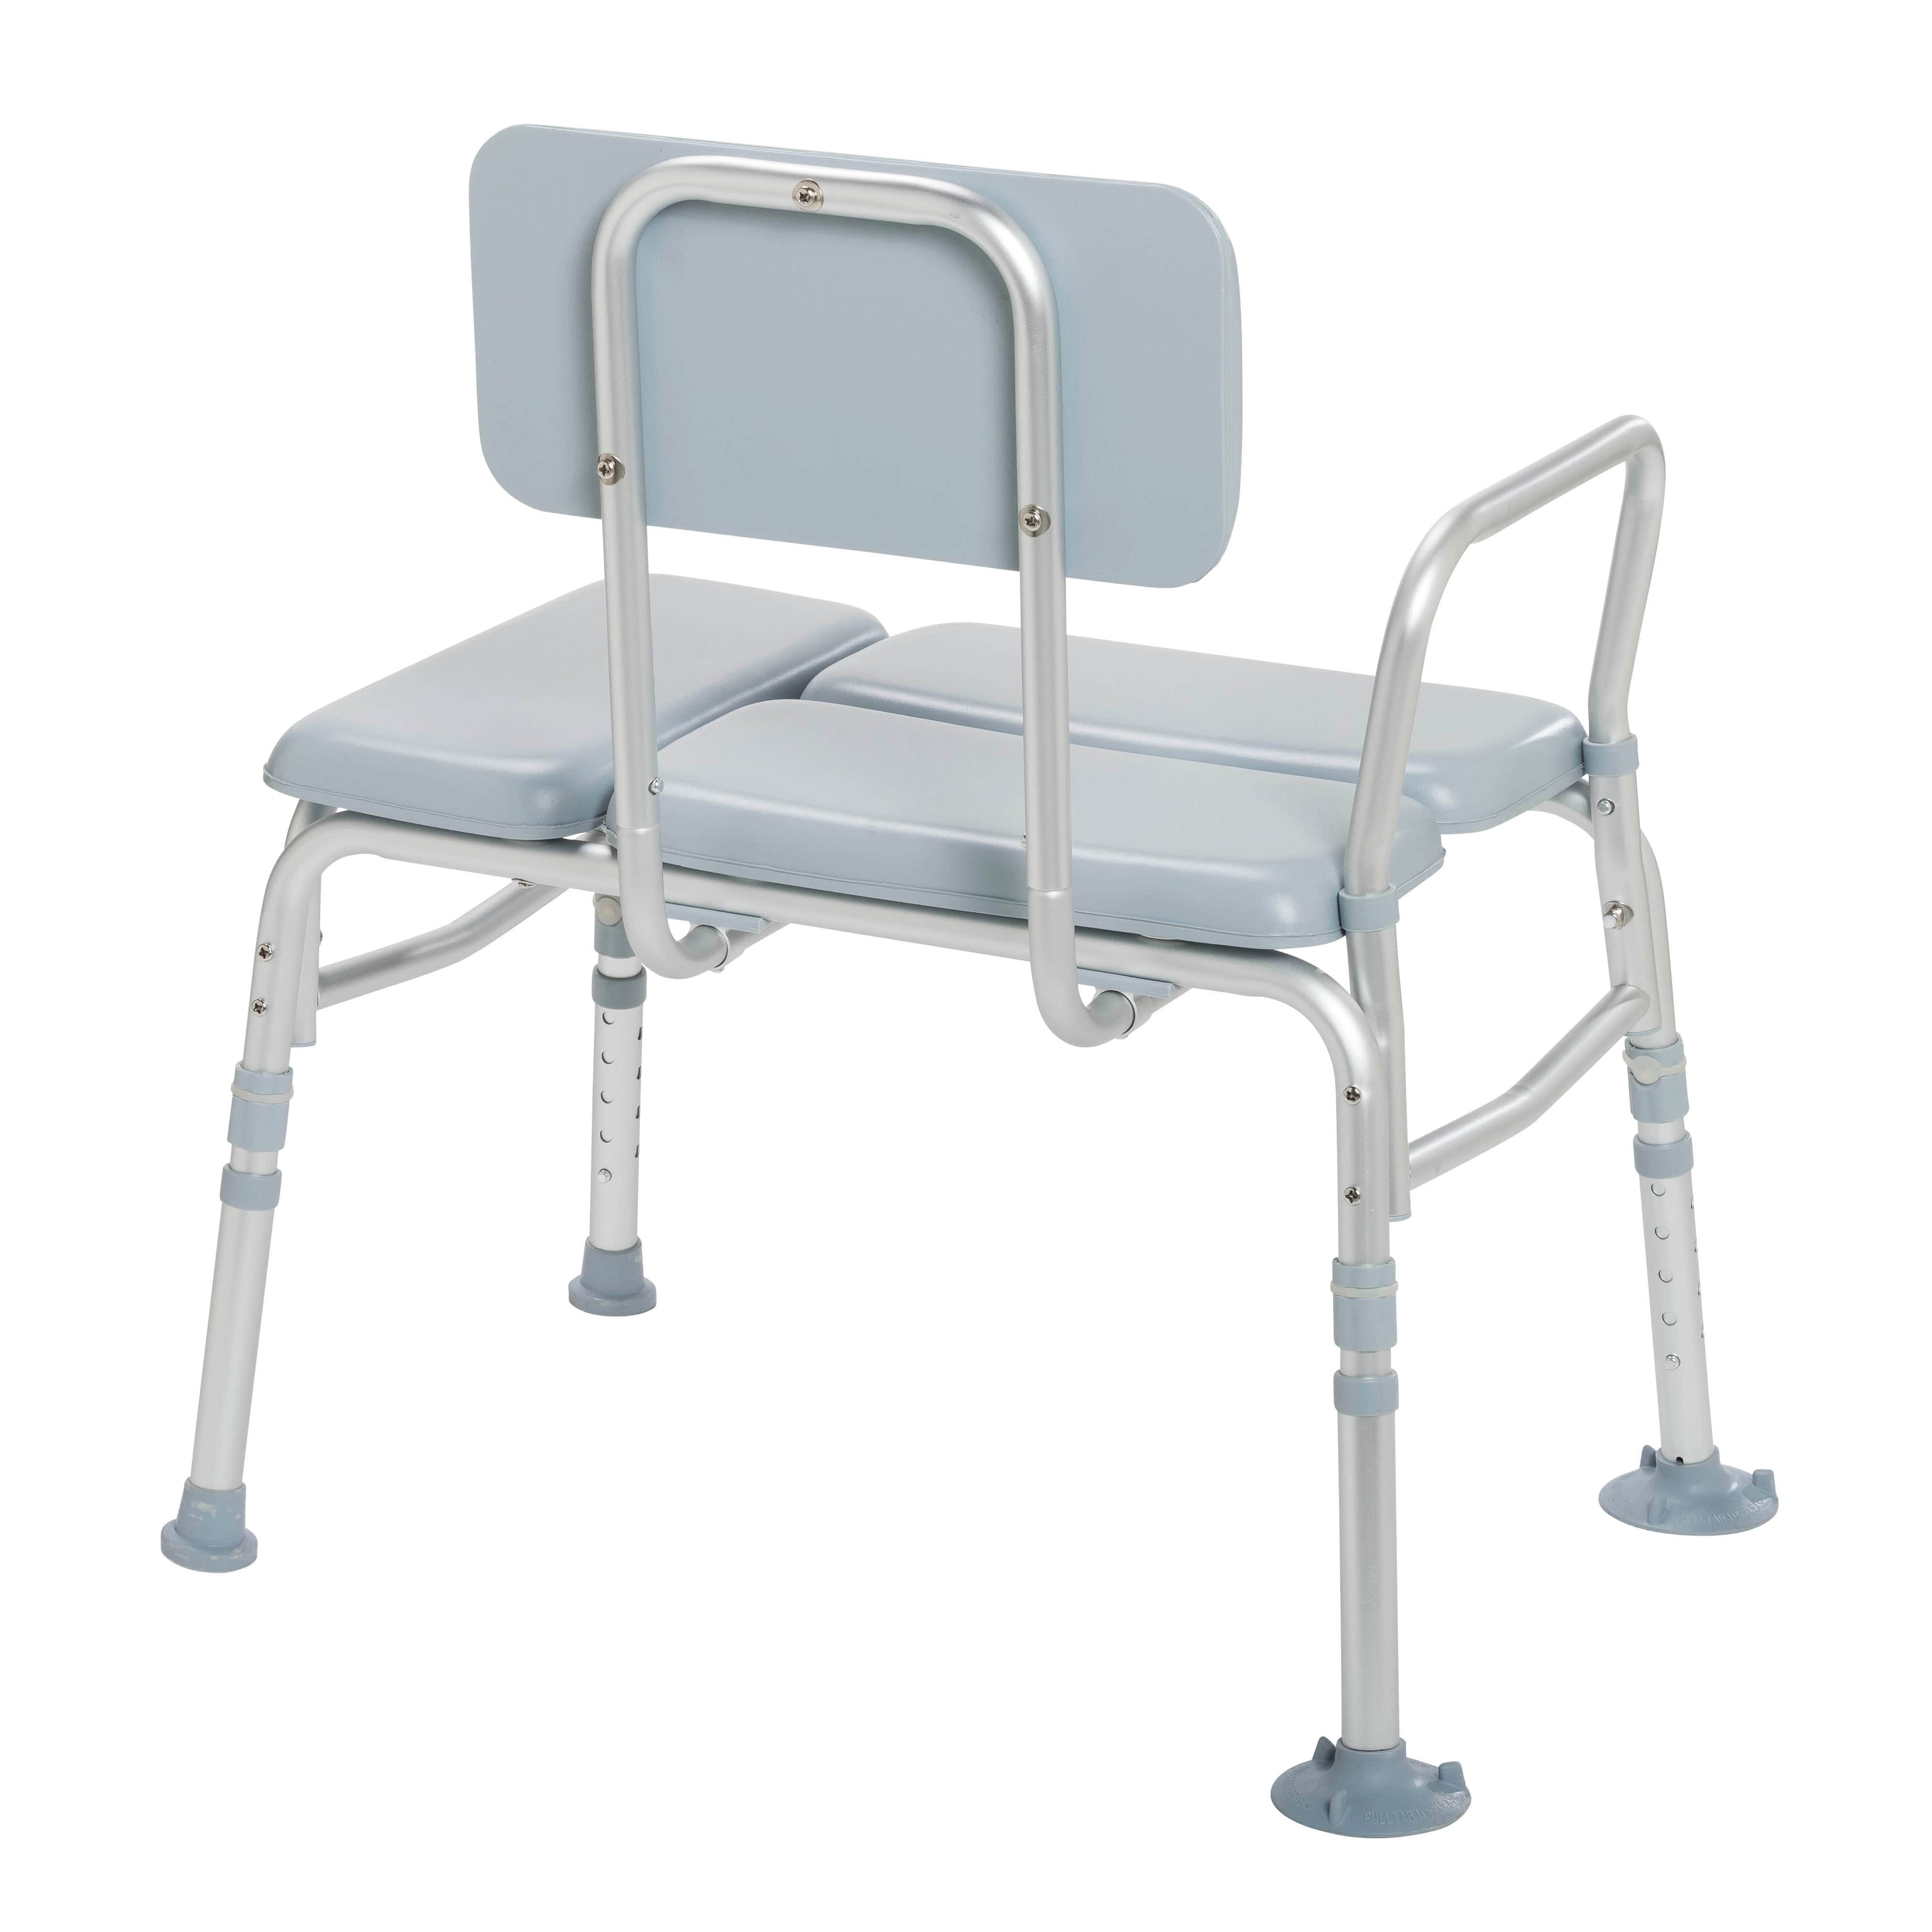 Drive Medical Bathroom Safety Drive Medical Padded Seat Transfer Bench